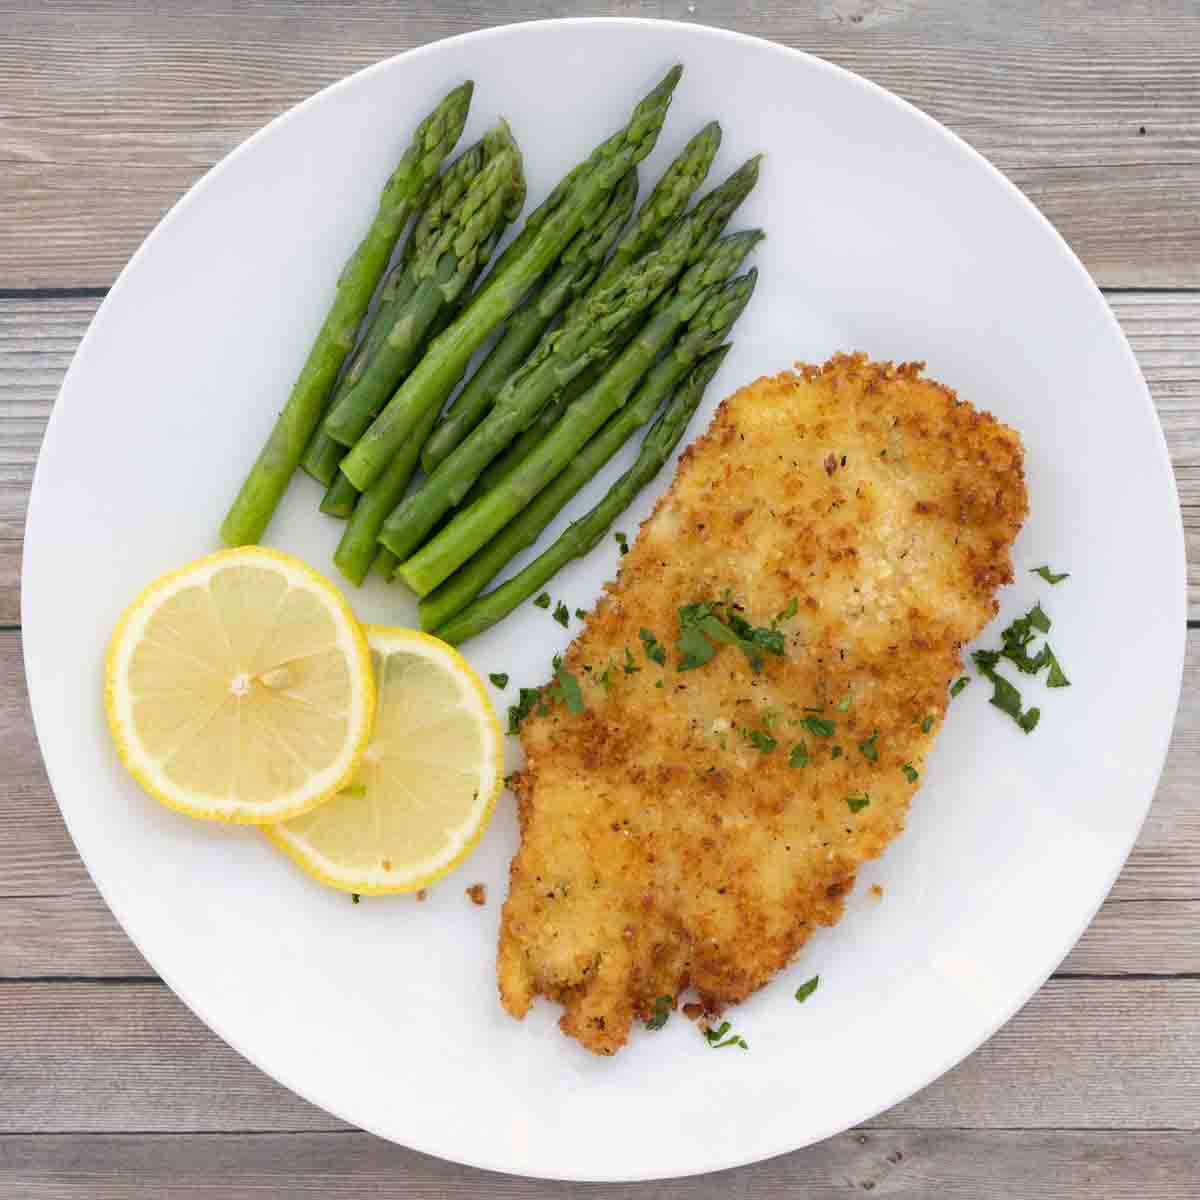 Chicken schnitzel on a white plate with lemon circles and asparagus.